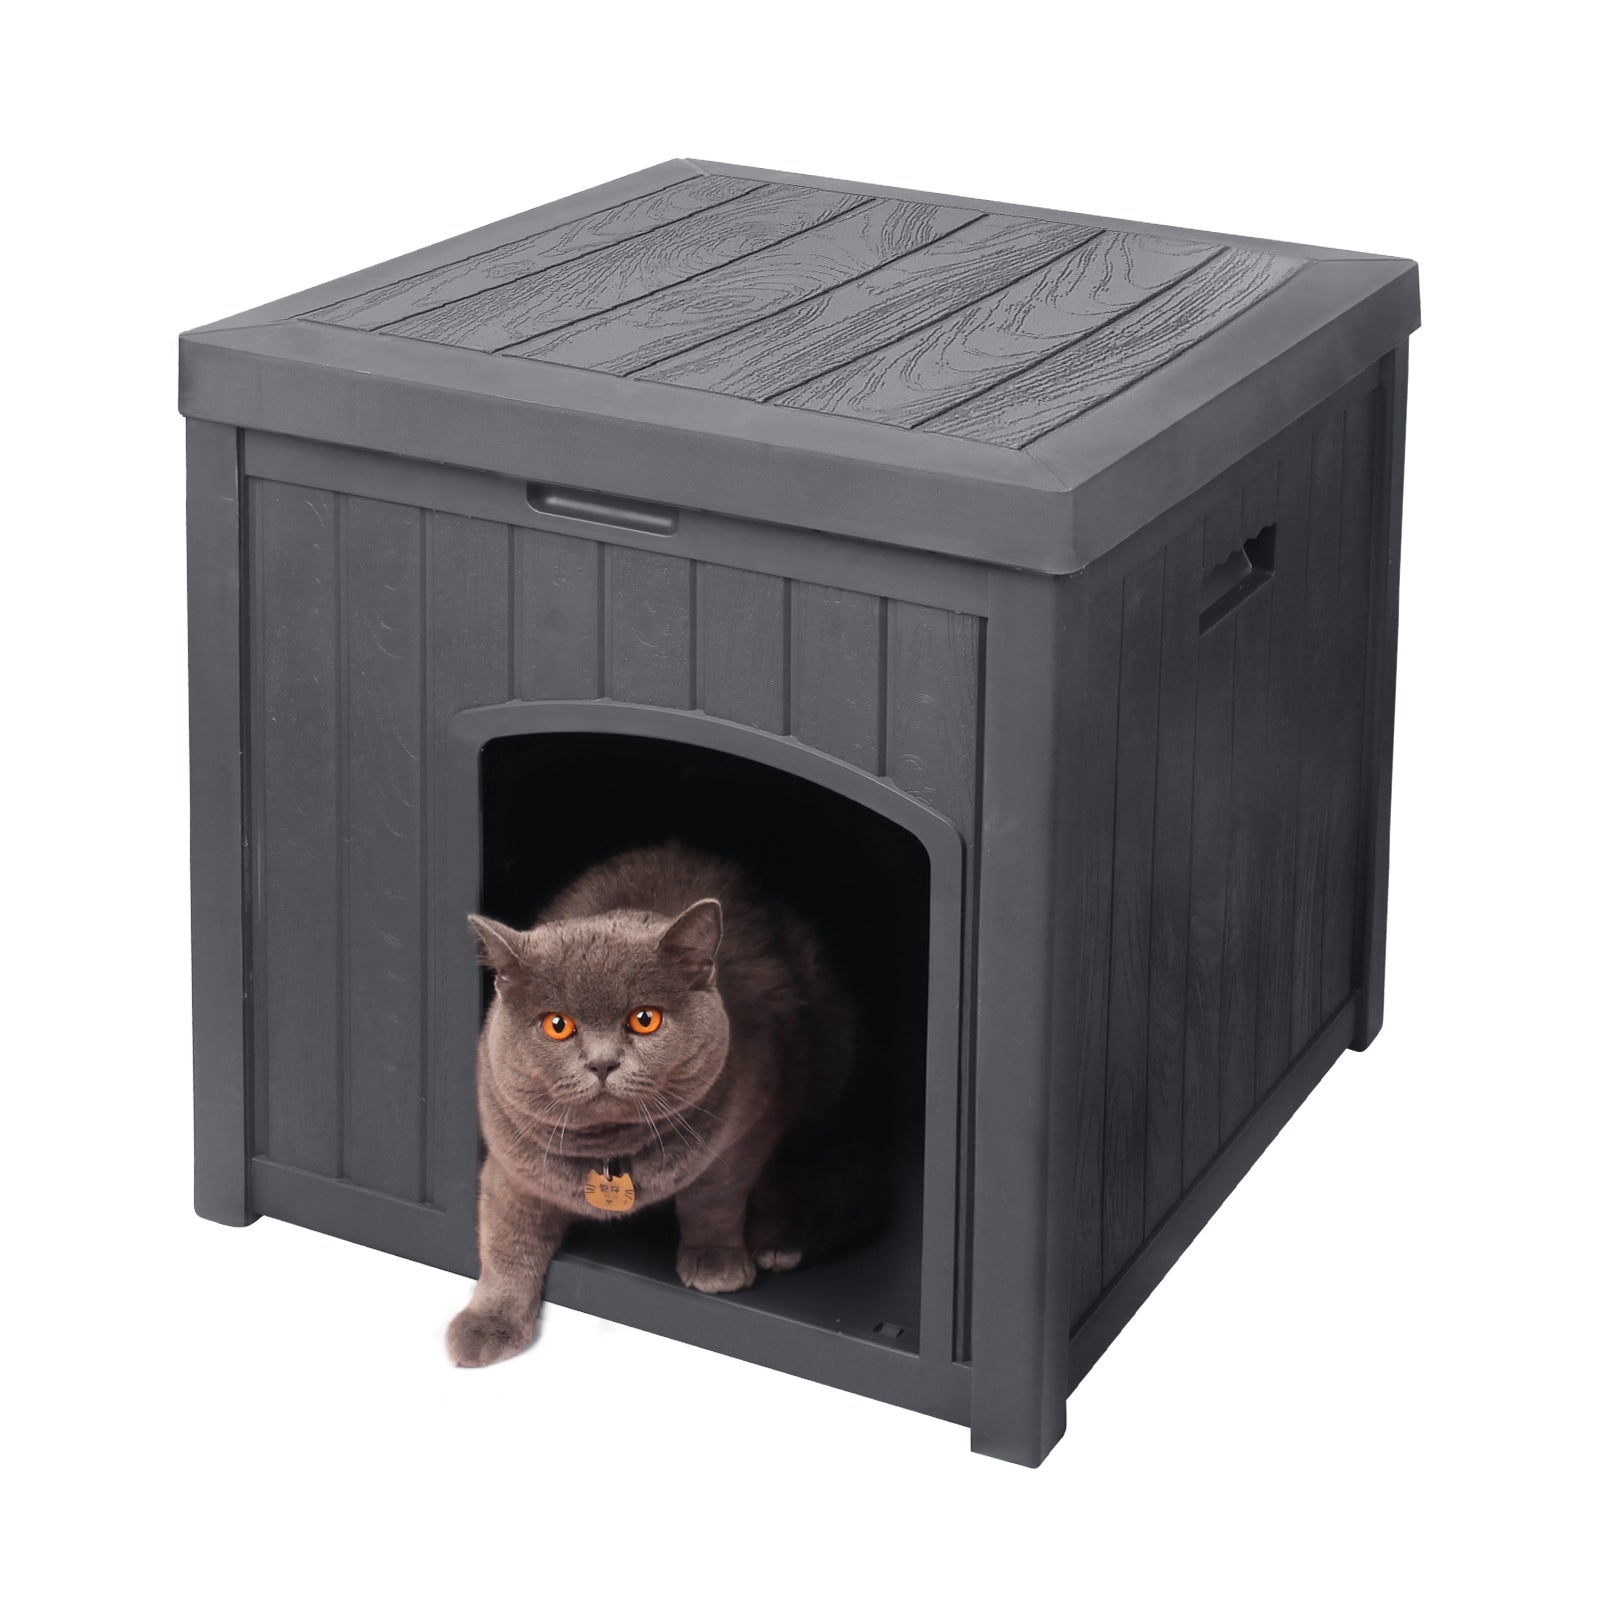 EHHLY Outdoor Cat House for Winter Waterproof, Outside Multiple Feral Cat Houses Weatherproof, Durable Resin Plastic, Grey